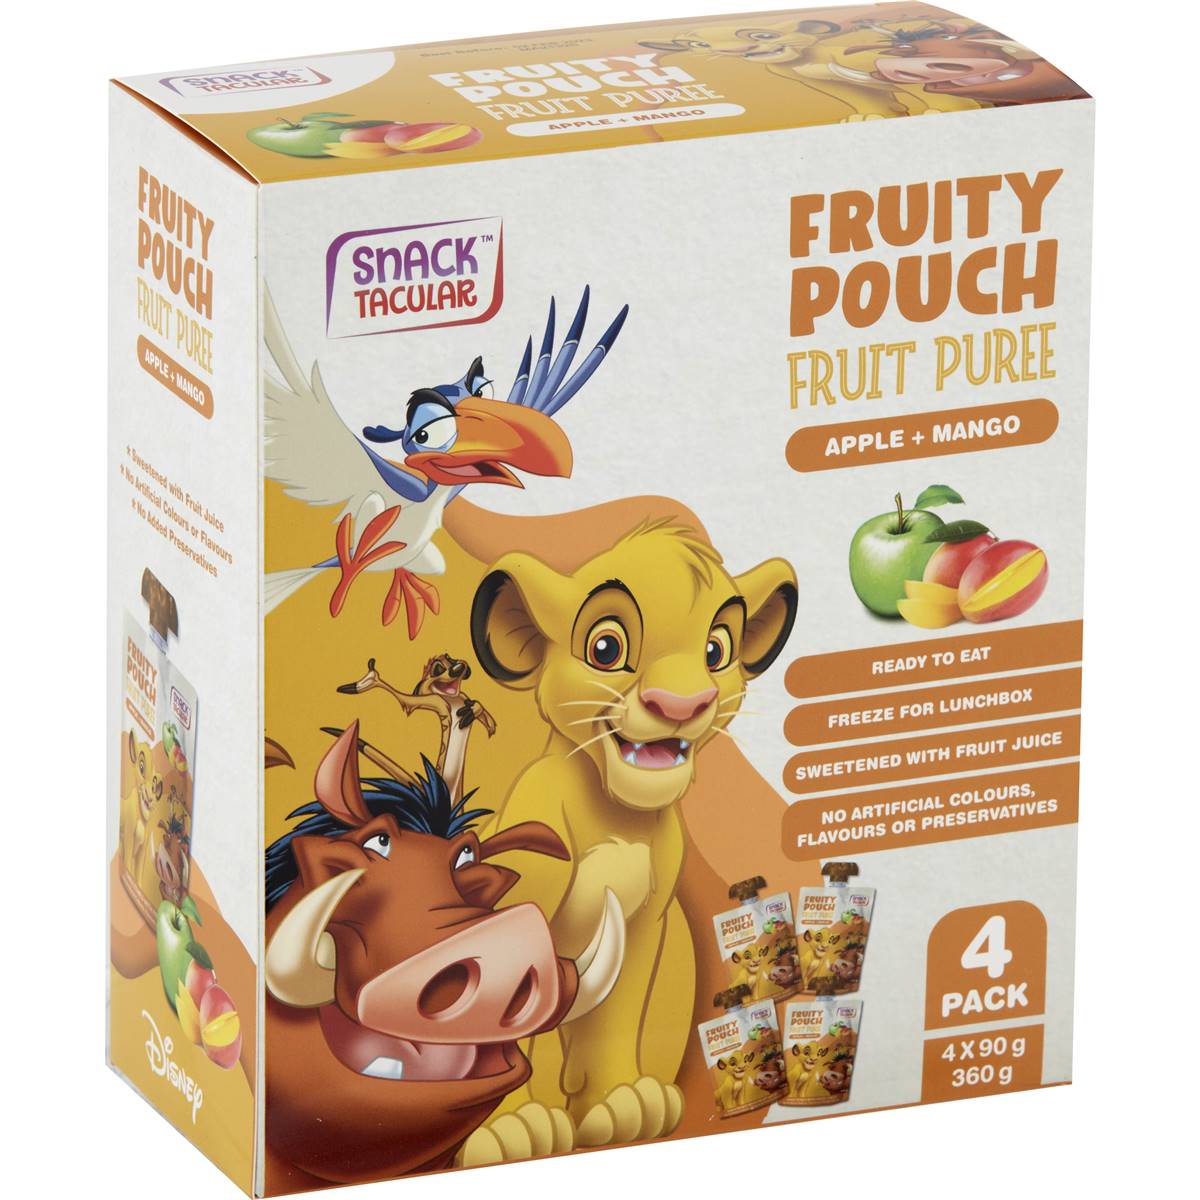 Calories in Snacktacular Fruity Pouch Fruit Puree Apple & Mango